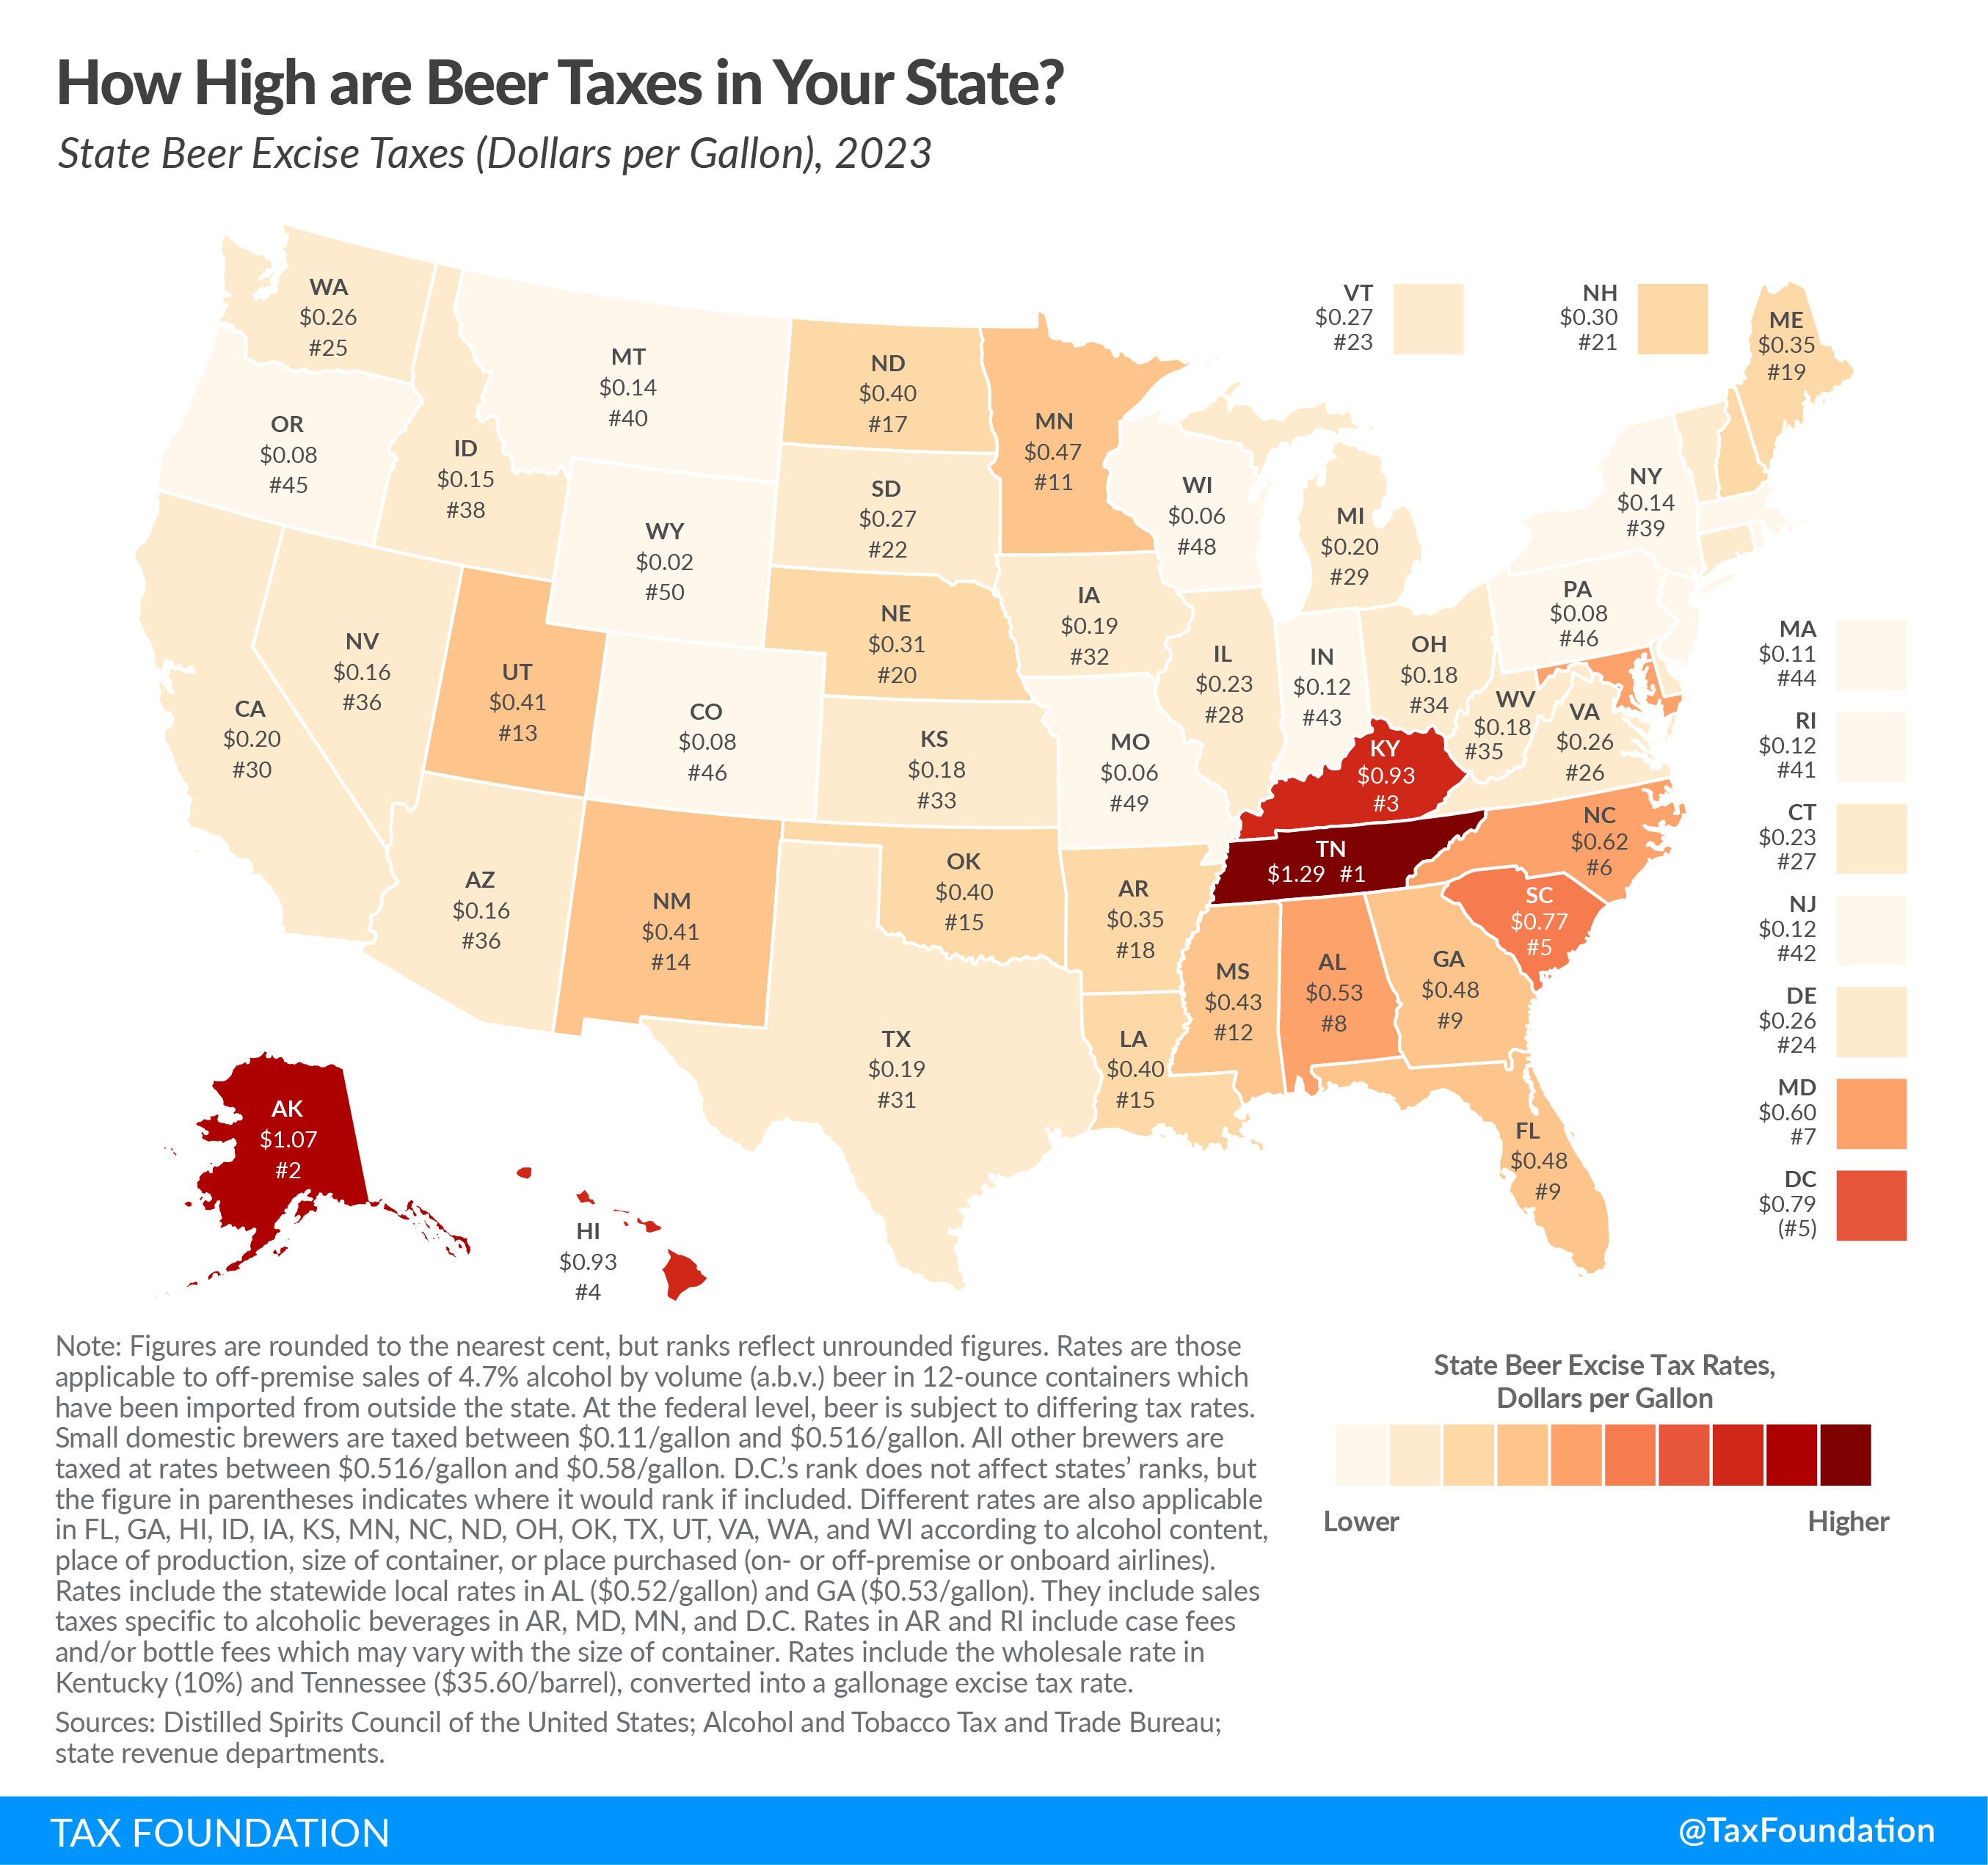 2023 beer taxes by state alcohol excise tax rates and beer excise tax rates